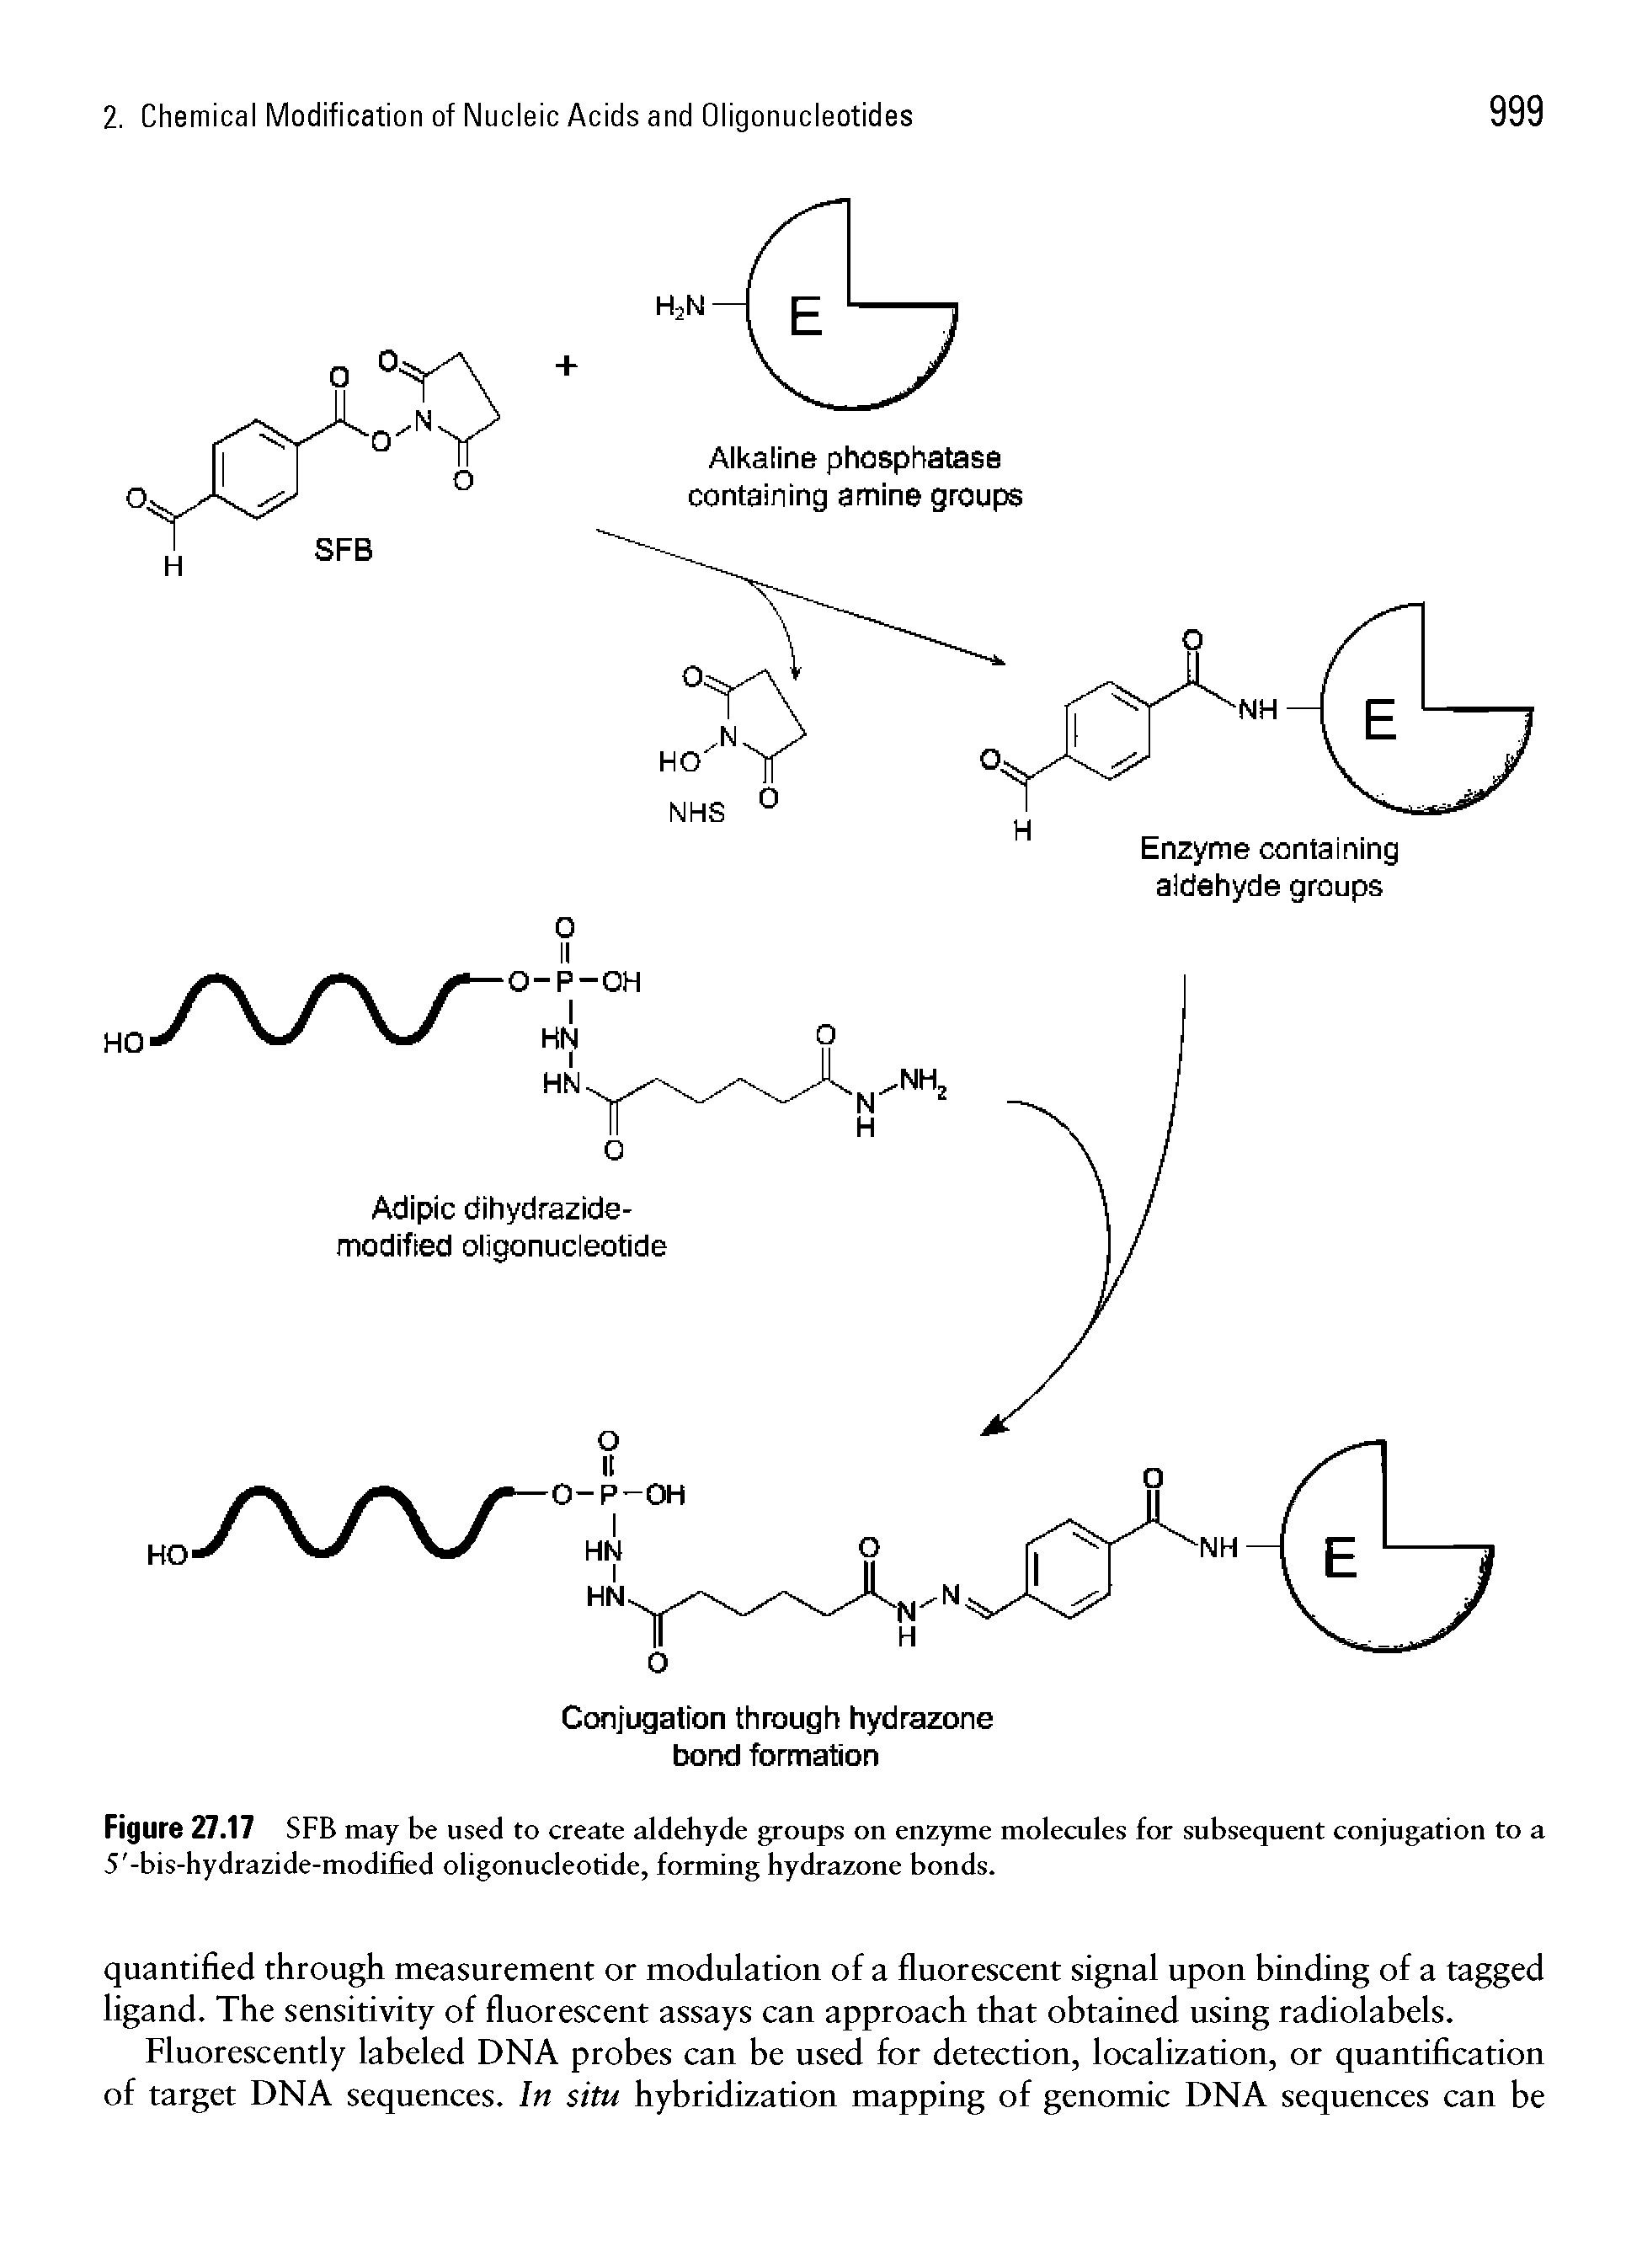 Figure 27.17 SFB may be used to create aldehyde groups on enzyme molecules for subsequent conjugation to a 5 -bis-hydrazide-modified oligonucleotide, forming hydrazone bonds.